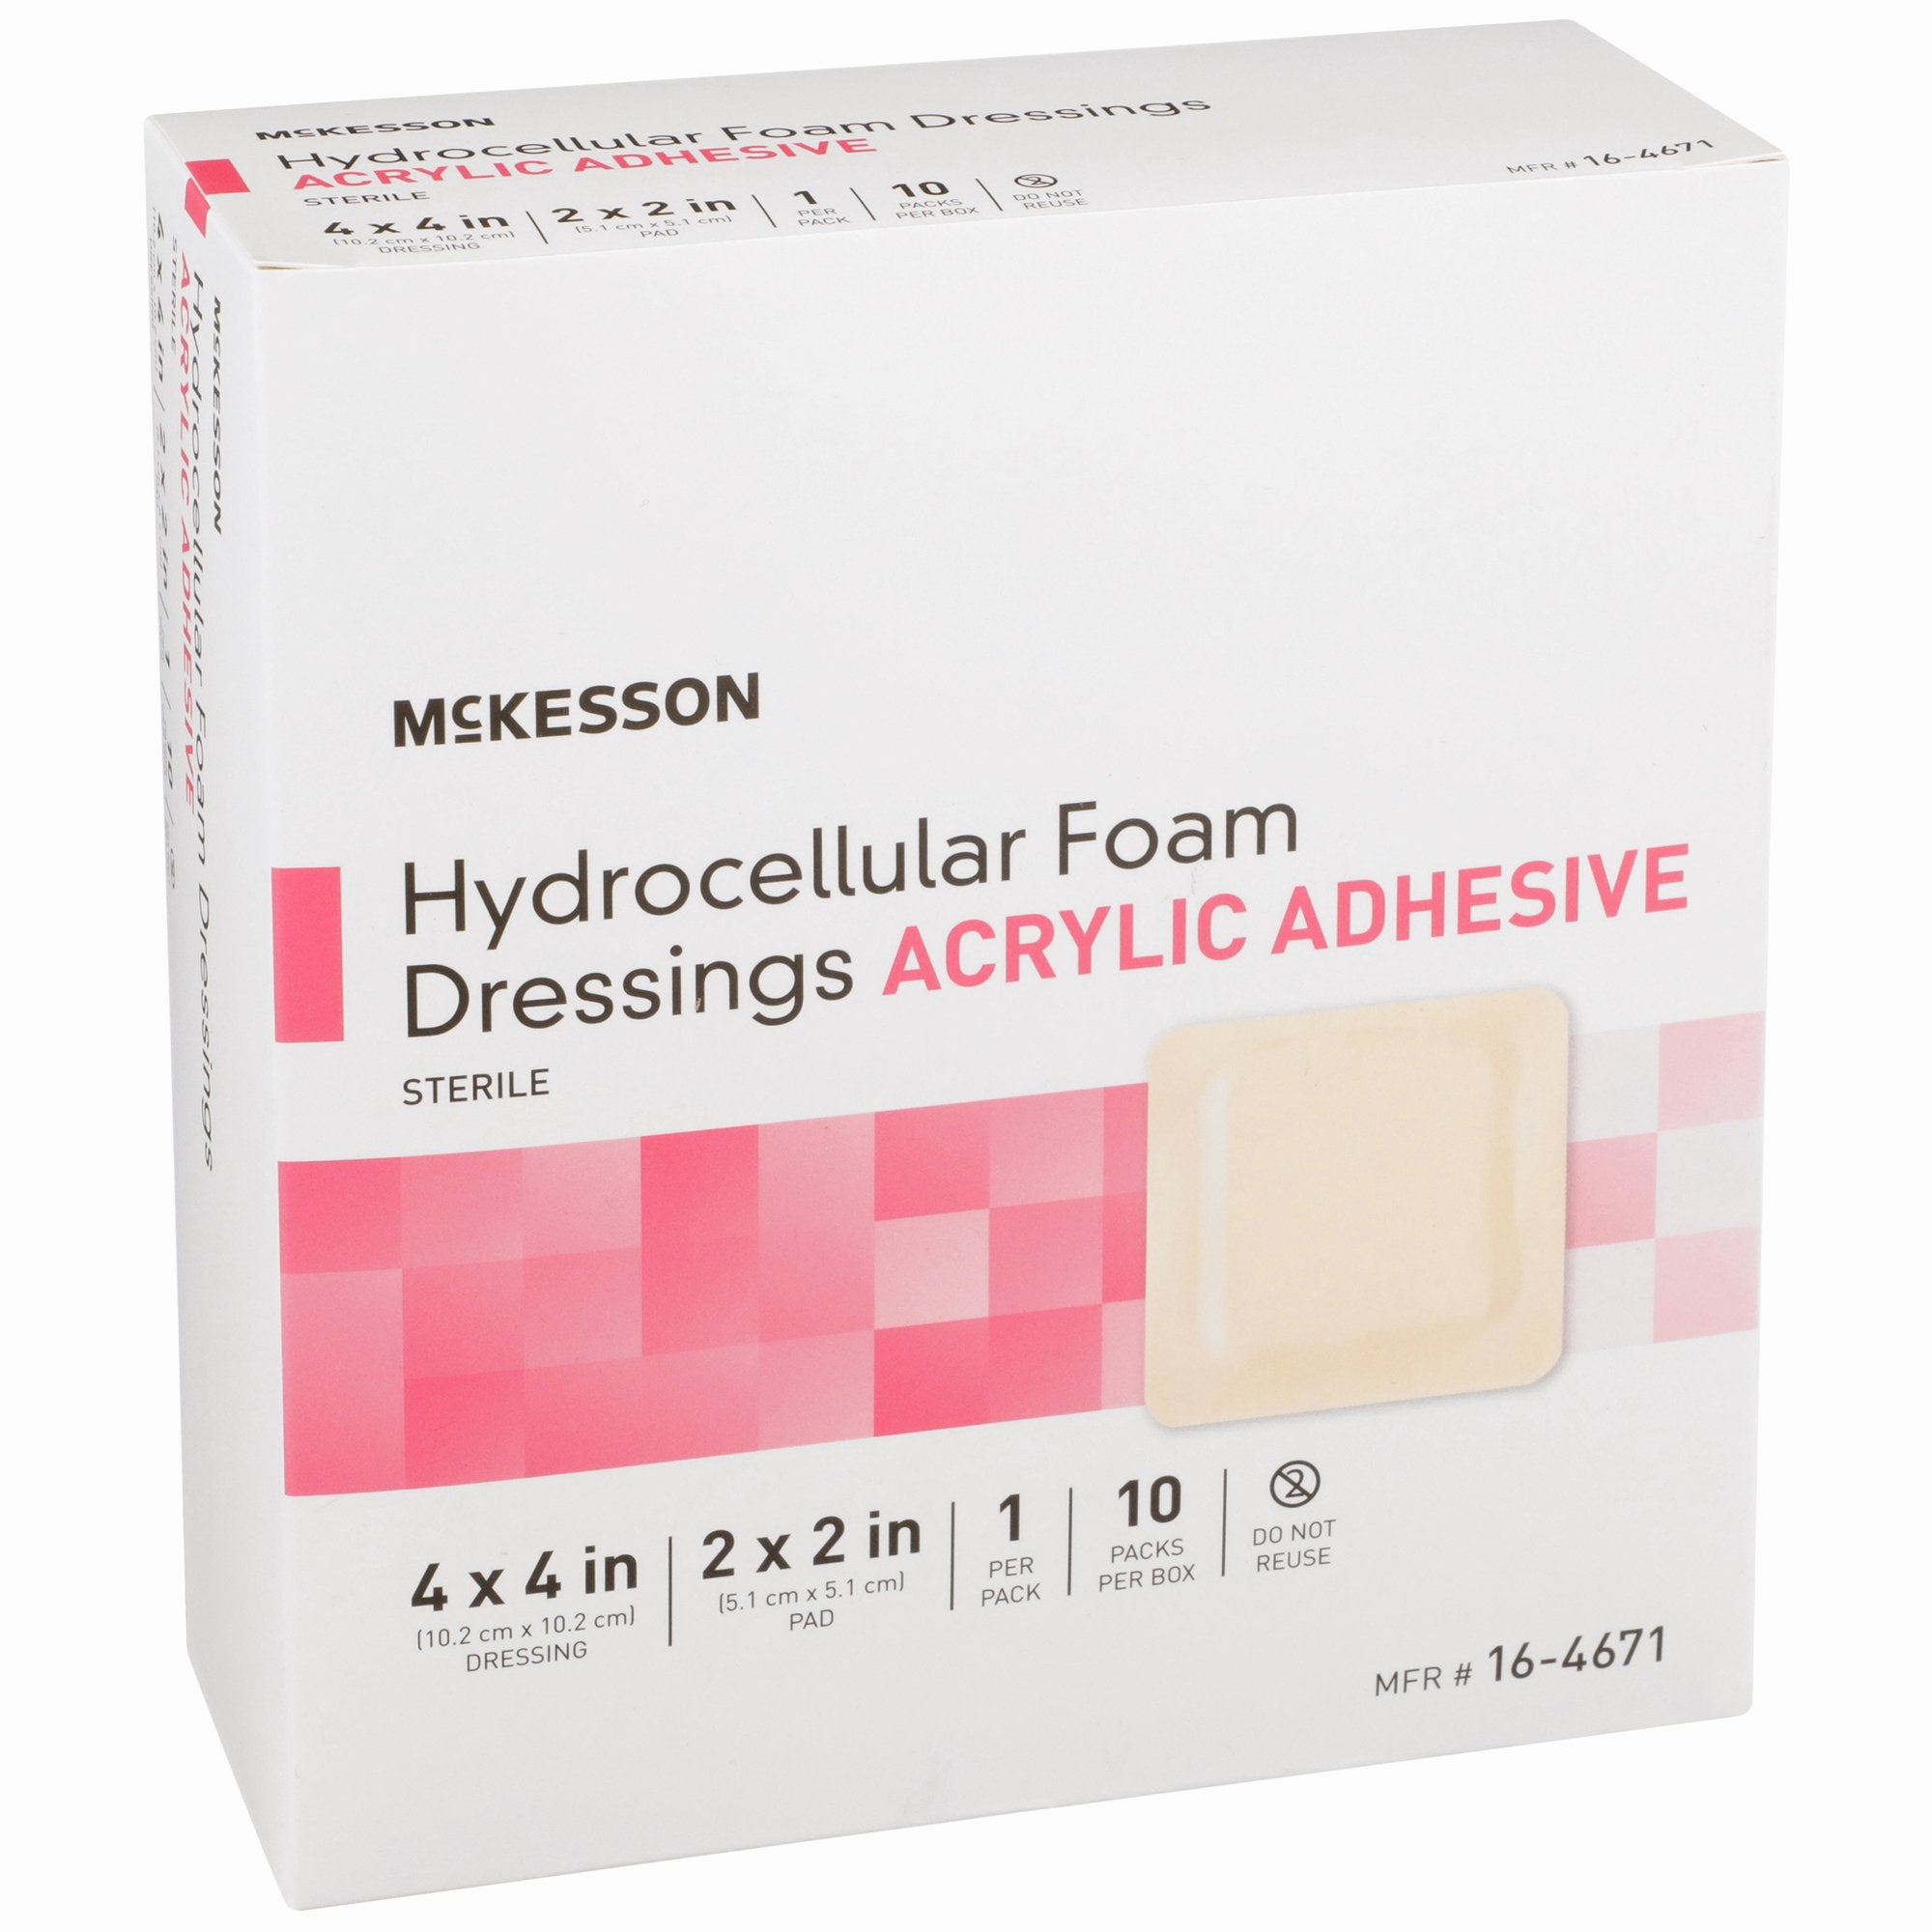 Foam Dressing McKesson 4 X 4 Inch With Border Film Backing Acrylic Adhesive Square Sterile